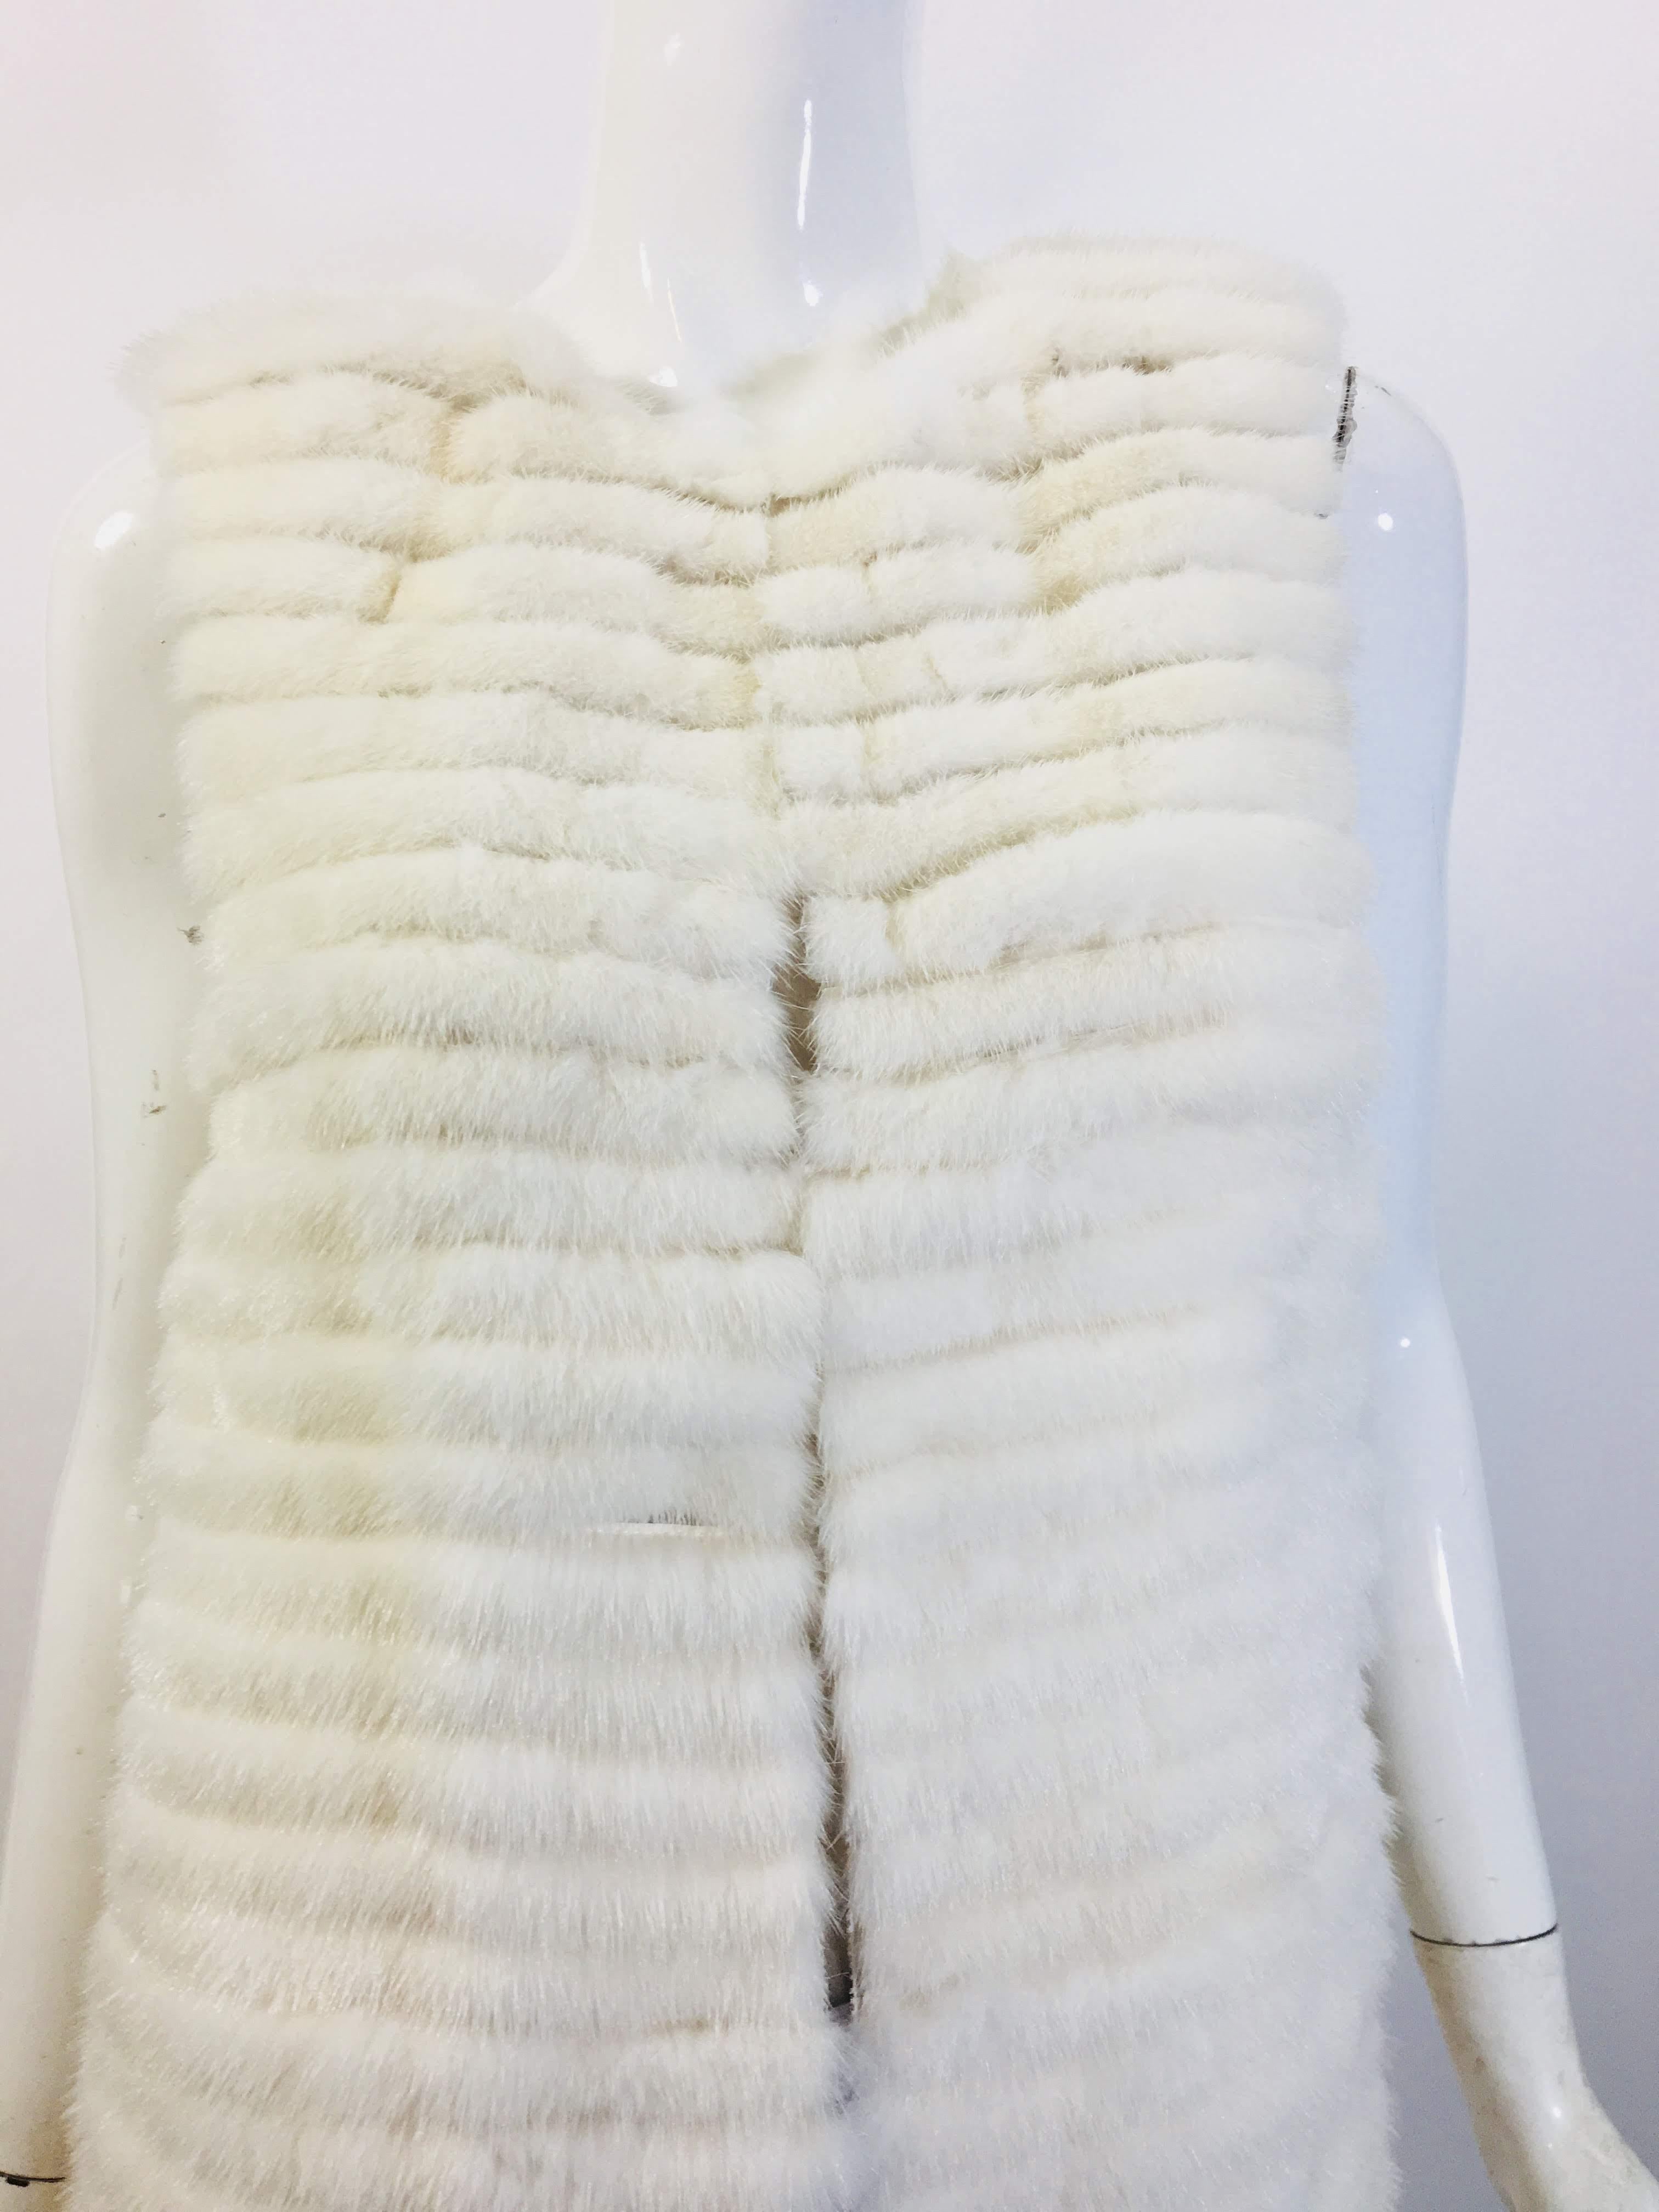 Vera Wang Collection White Open Front Long Line Vest
Tiered -Style Knee Length
Made in the USA
100% Mink with Silk Sheer Lining
Size 2